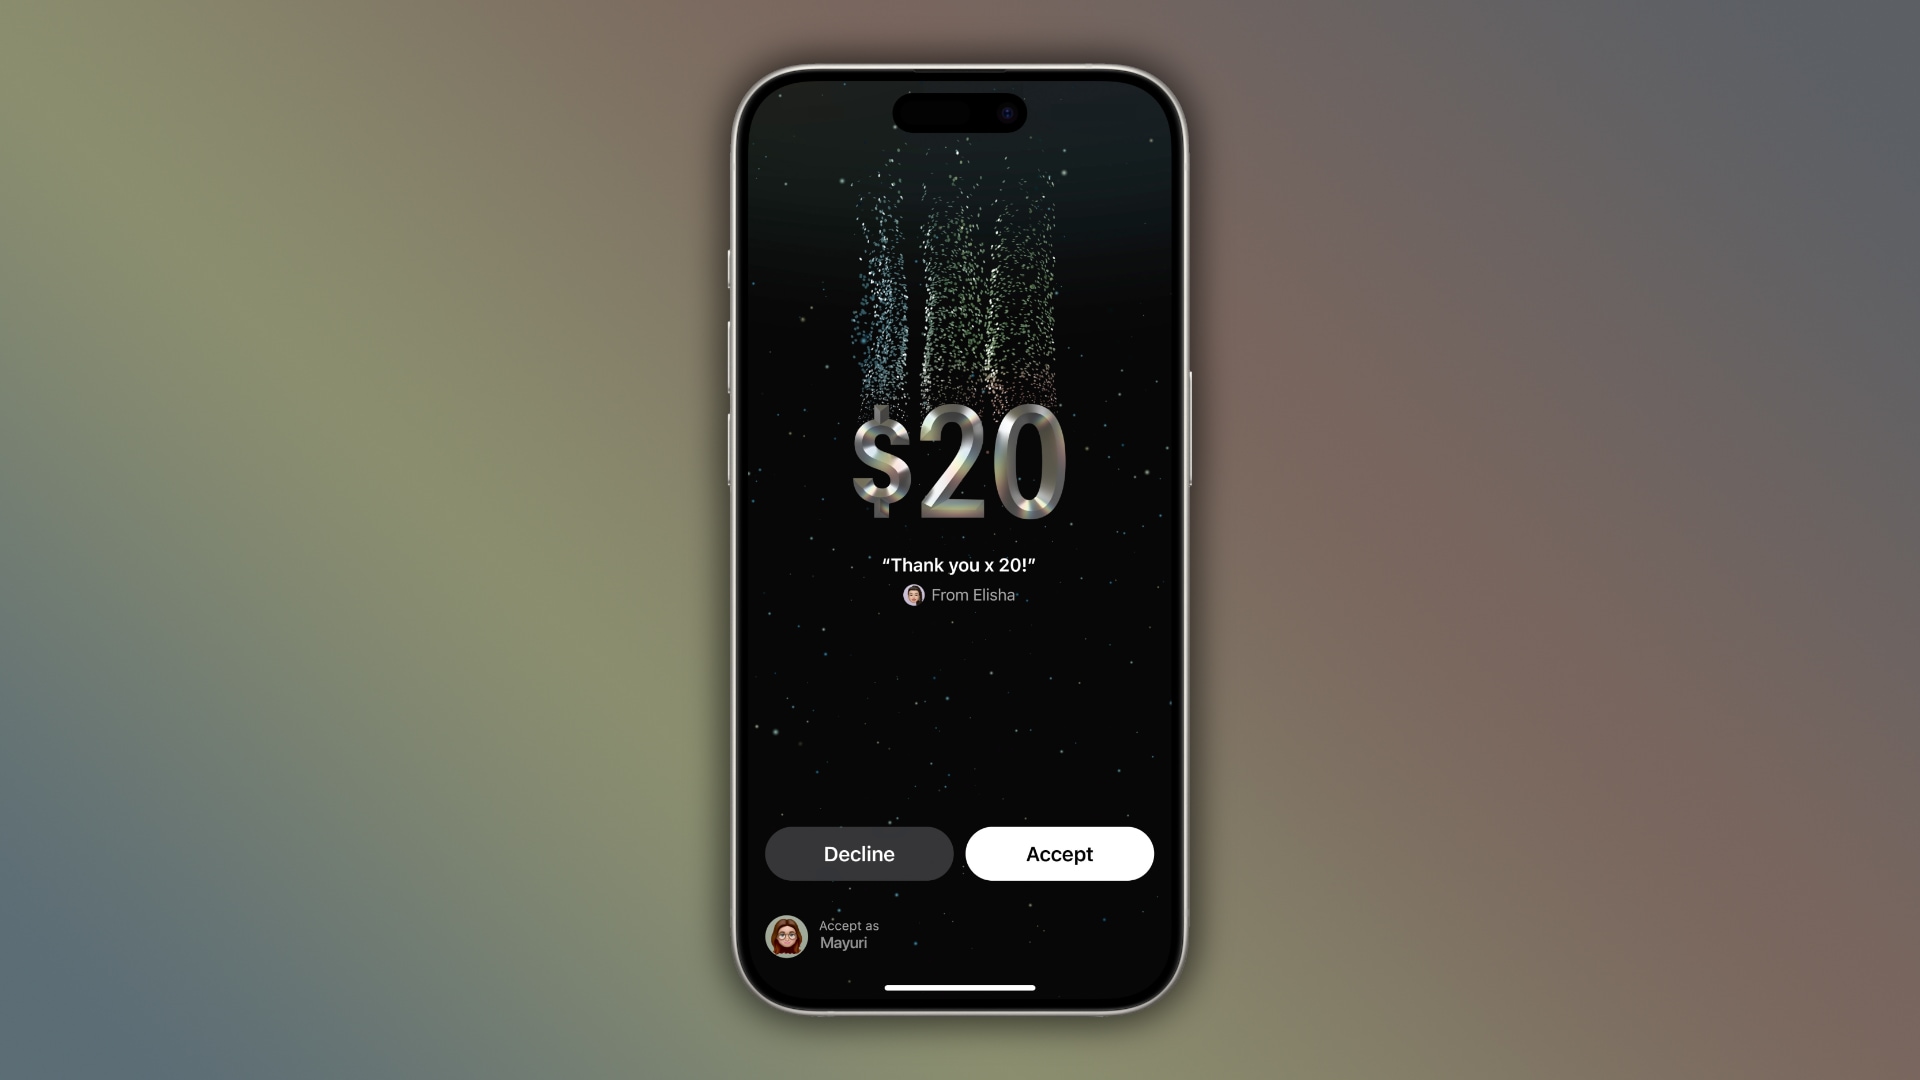 iPhone showcasing the new Tap to Cash feature in iOS 18, set against a colorful gradient background